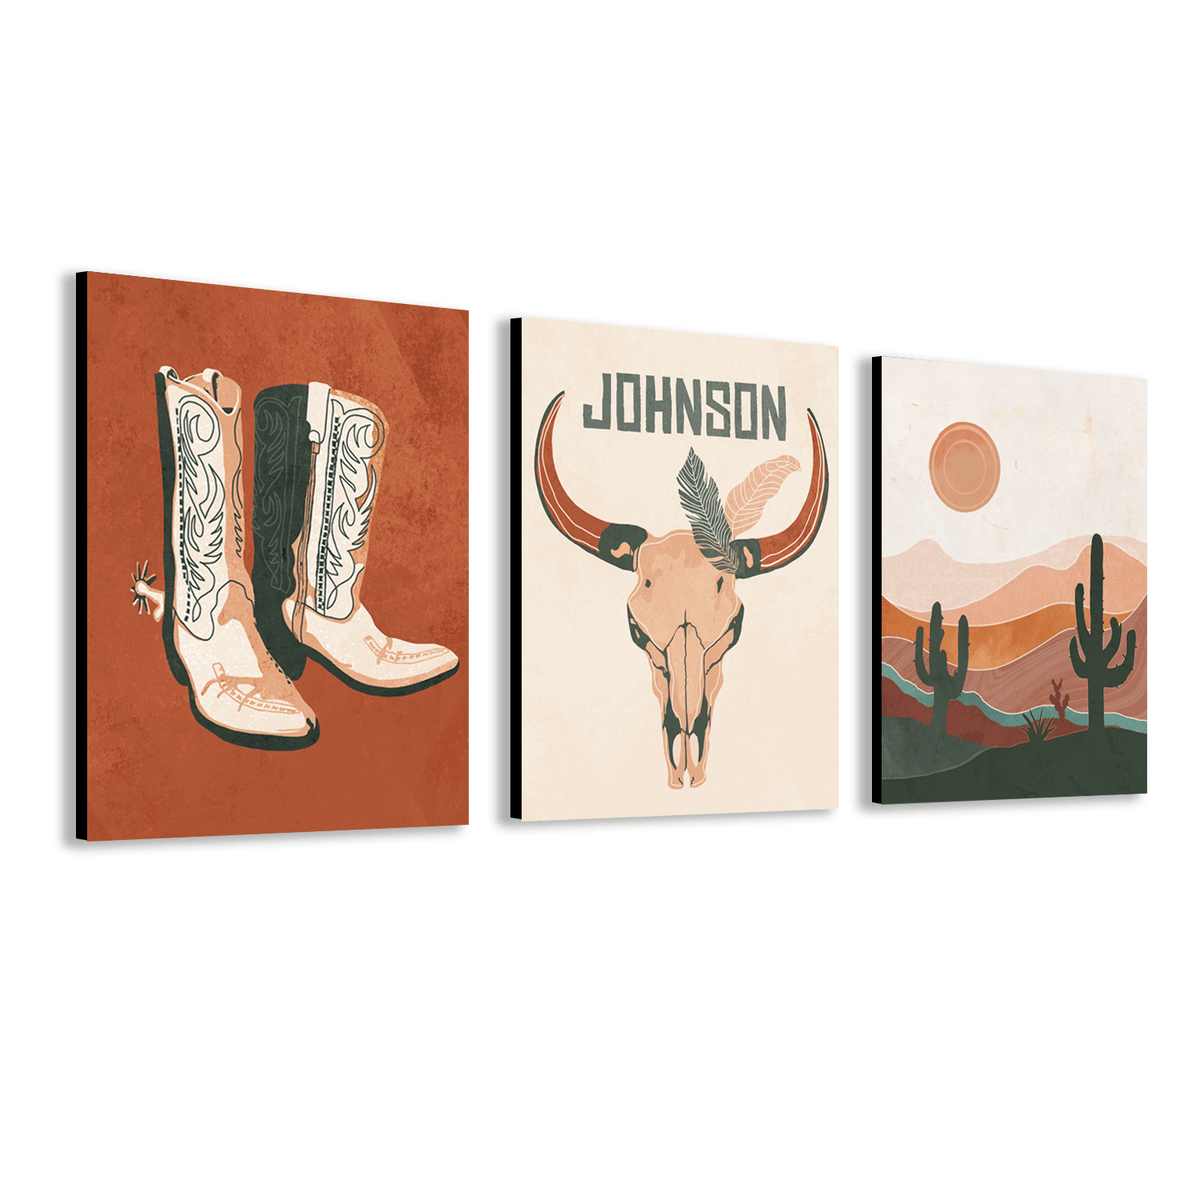 Set of three Southwestern Desert Boho theme art prints featuring your personalization on the center print.